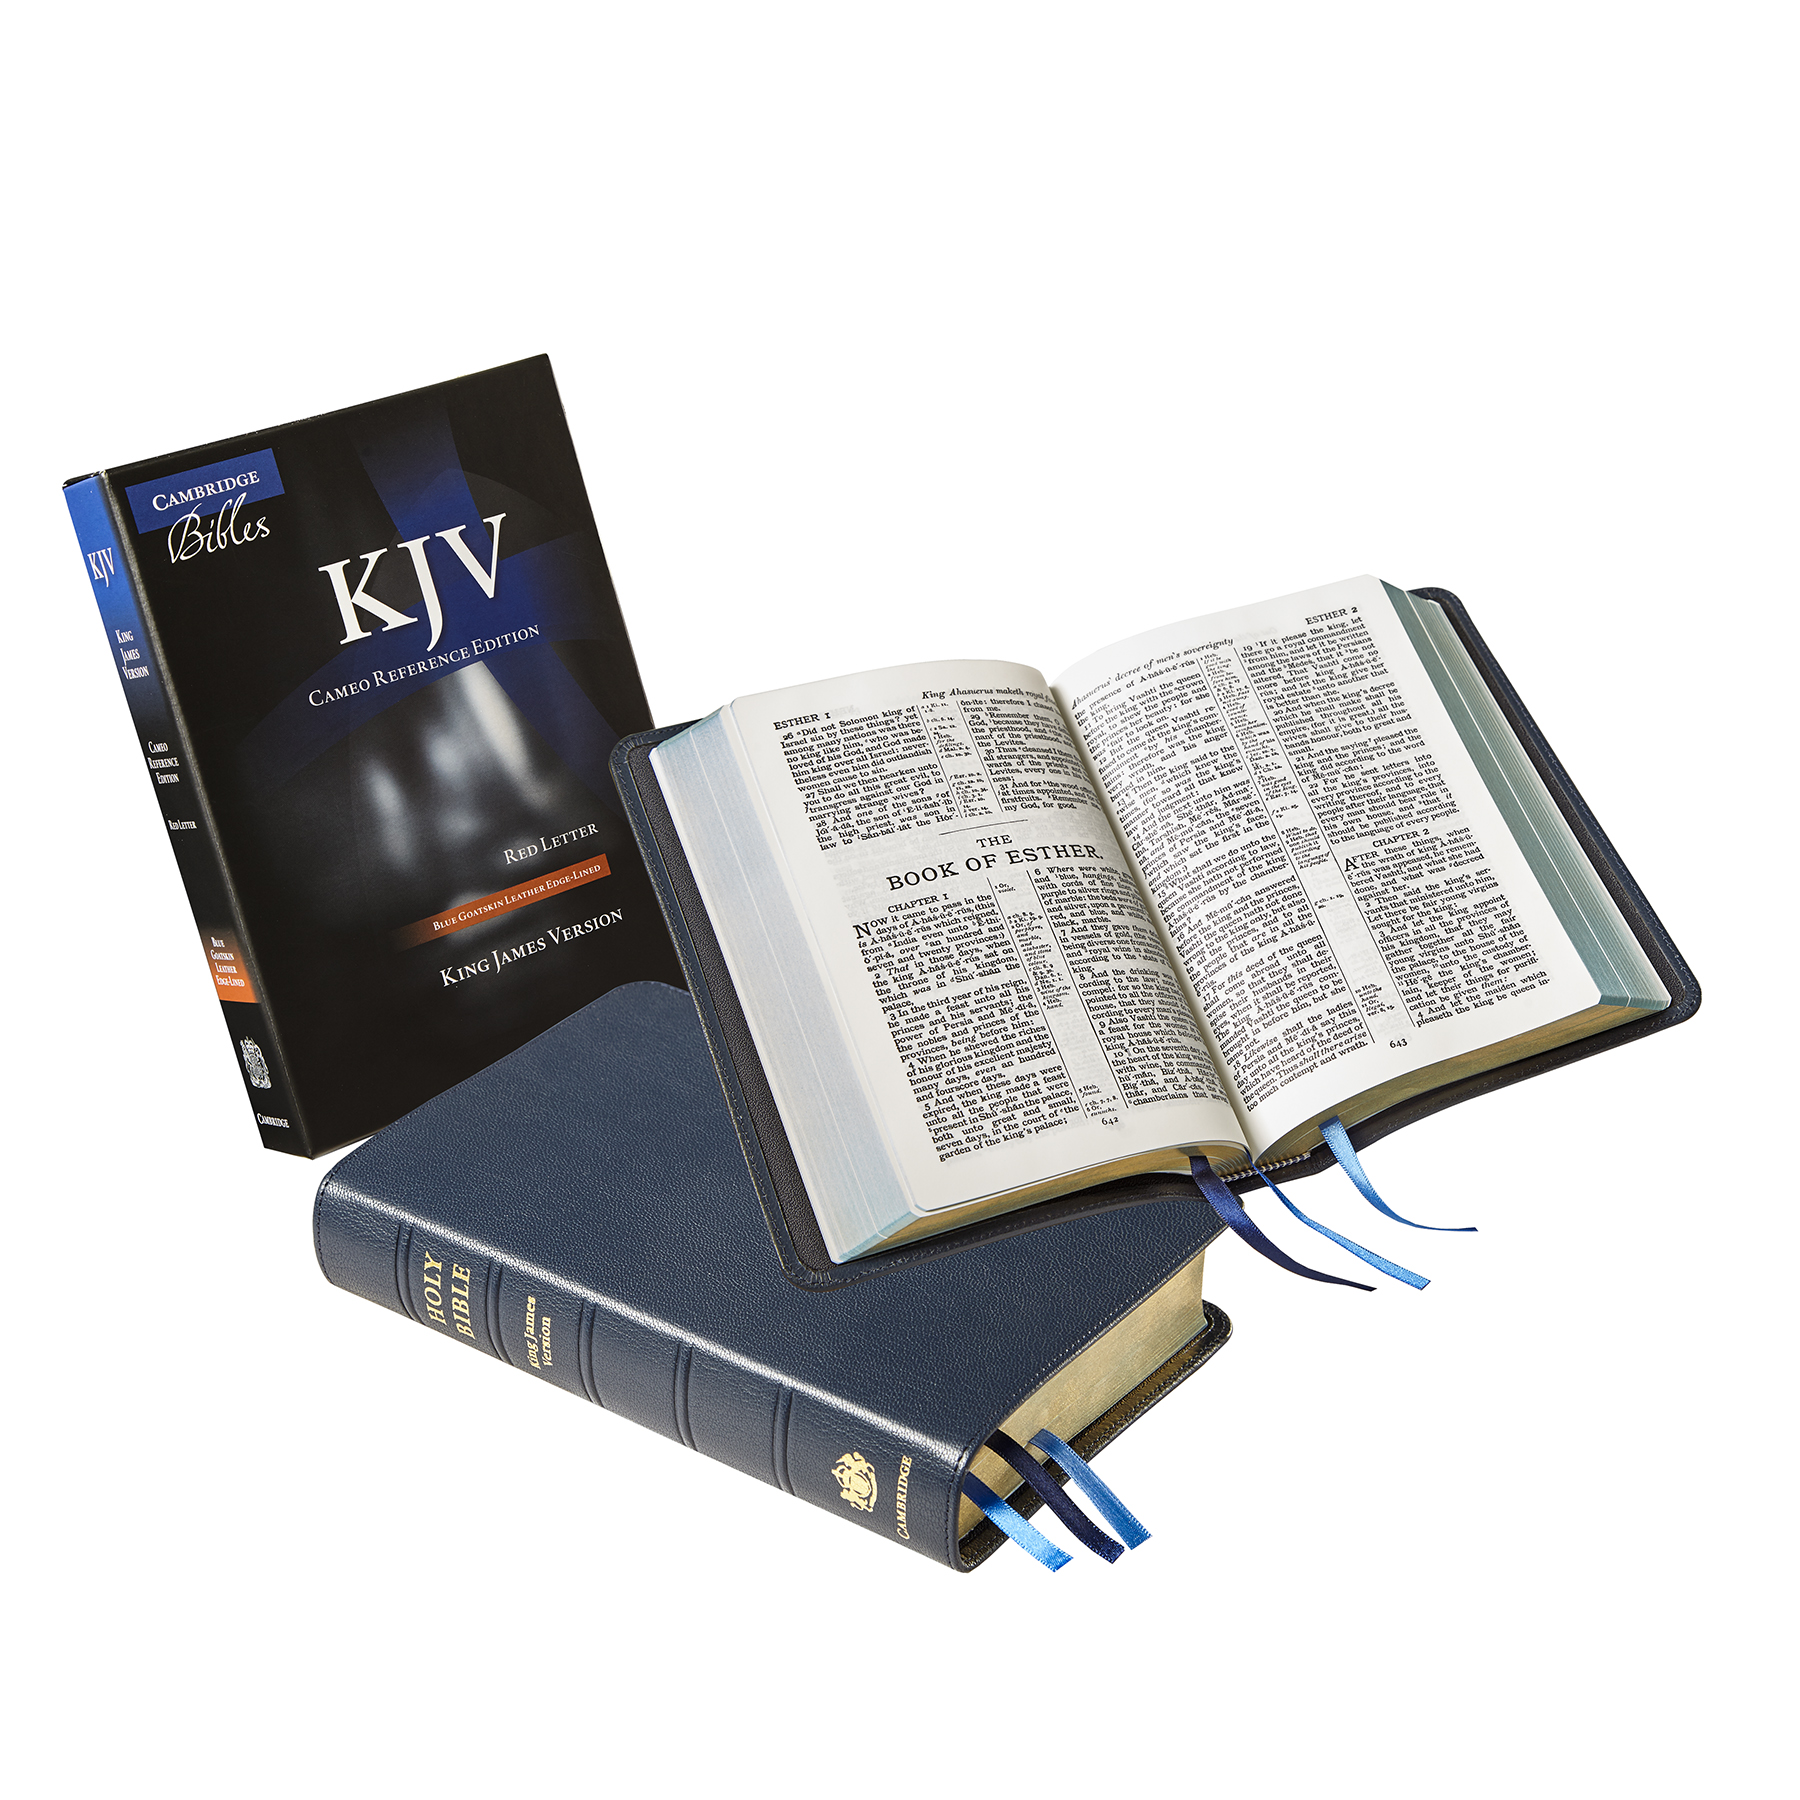 Cambridge KJV Personal Concord Reference Bible, Black French